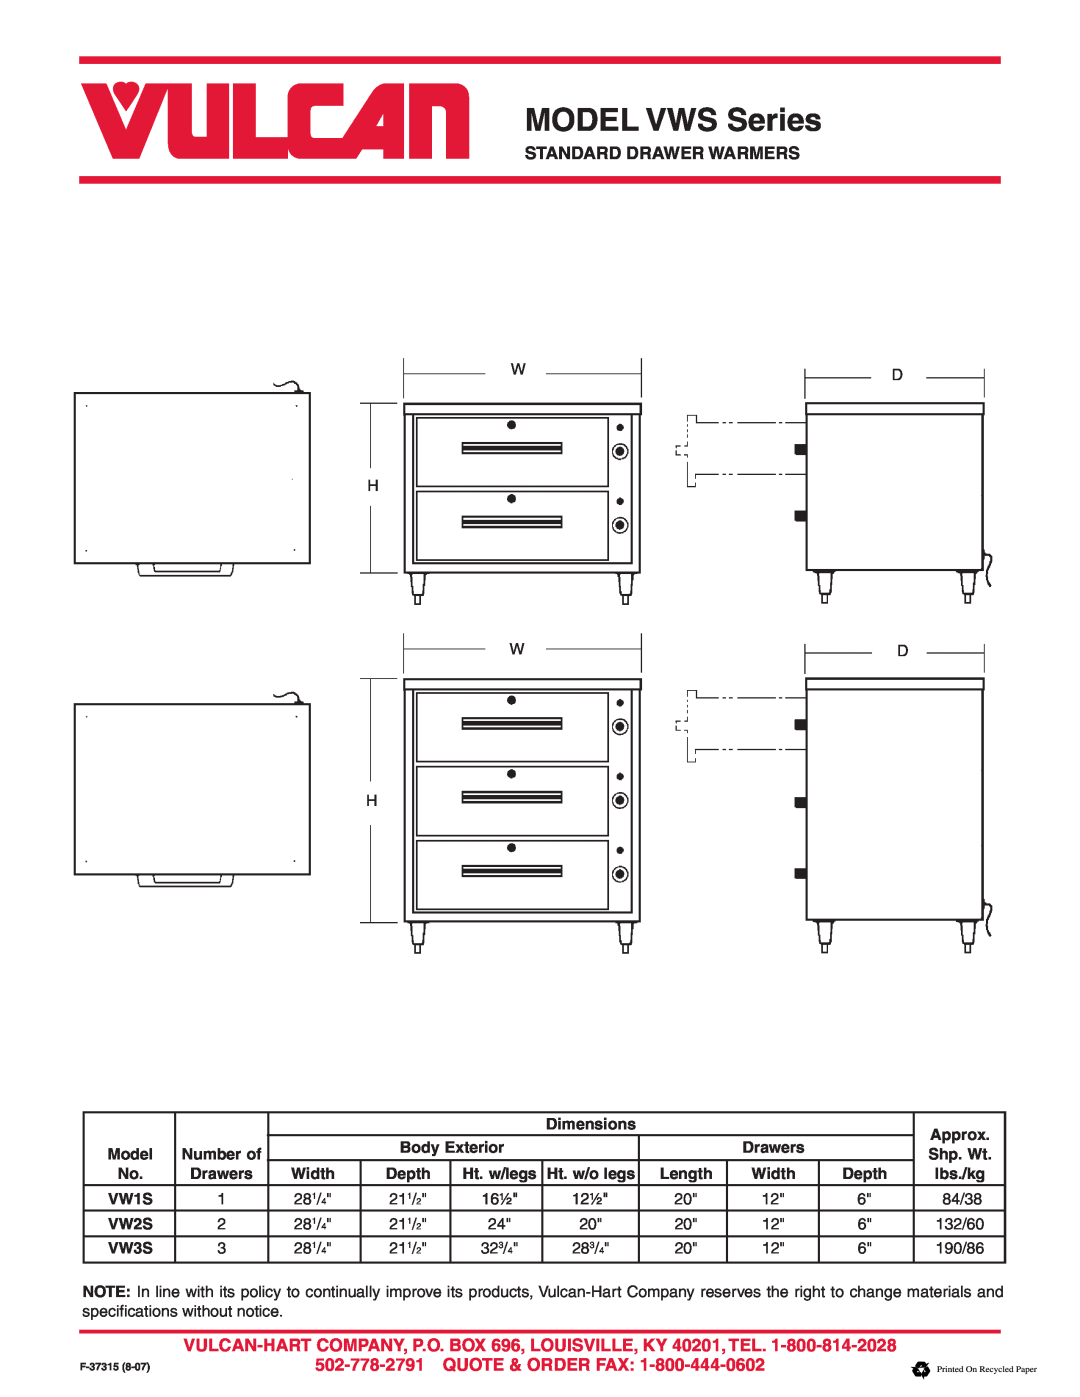 Vulcan-Hart warranty MODEL VWS Series, Standard Drawer Warmers, Quote & Order Fax, Dimensions 